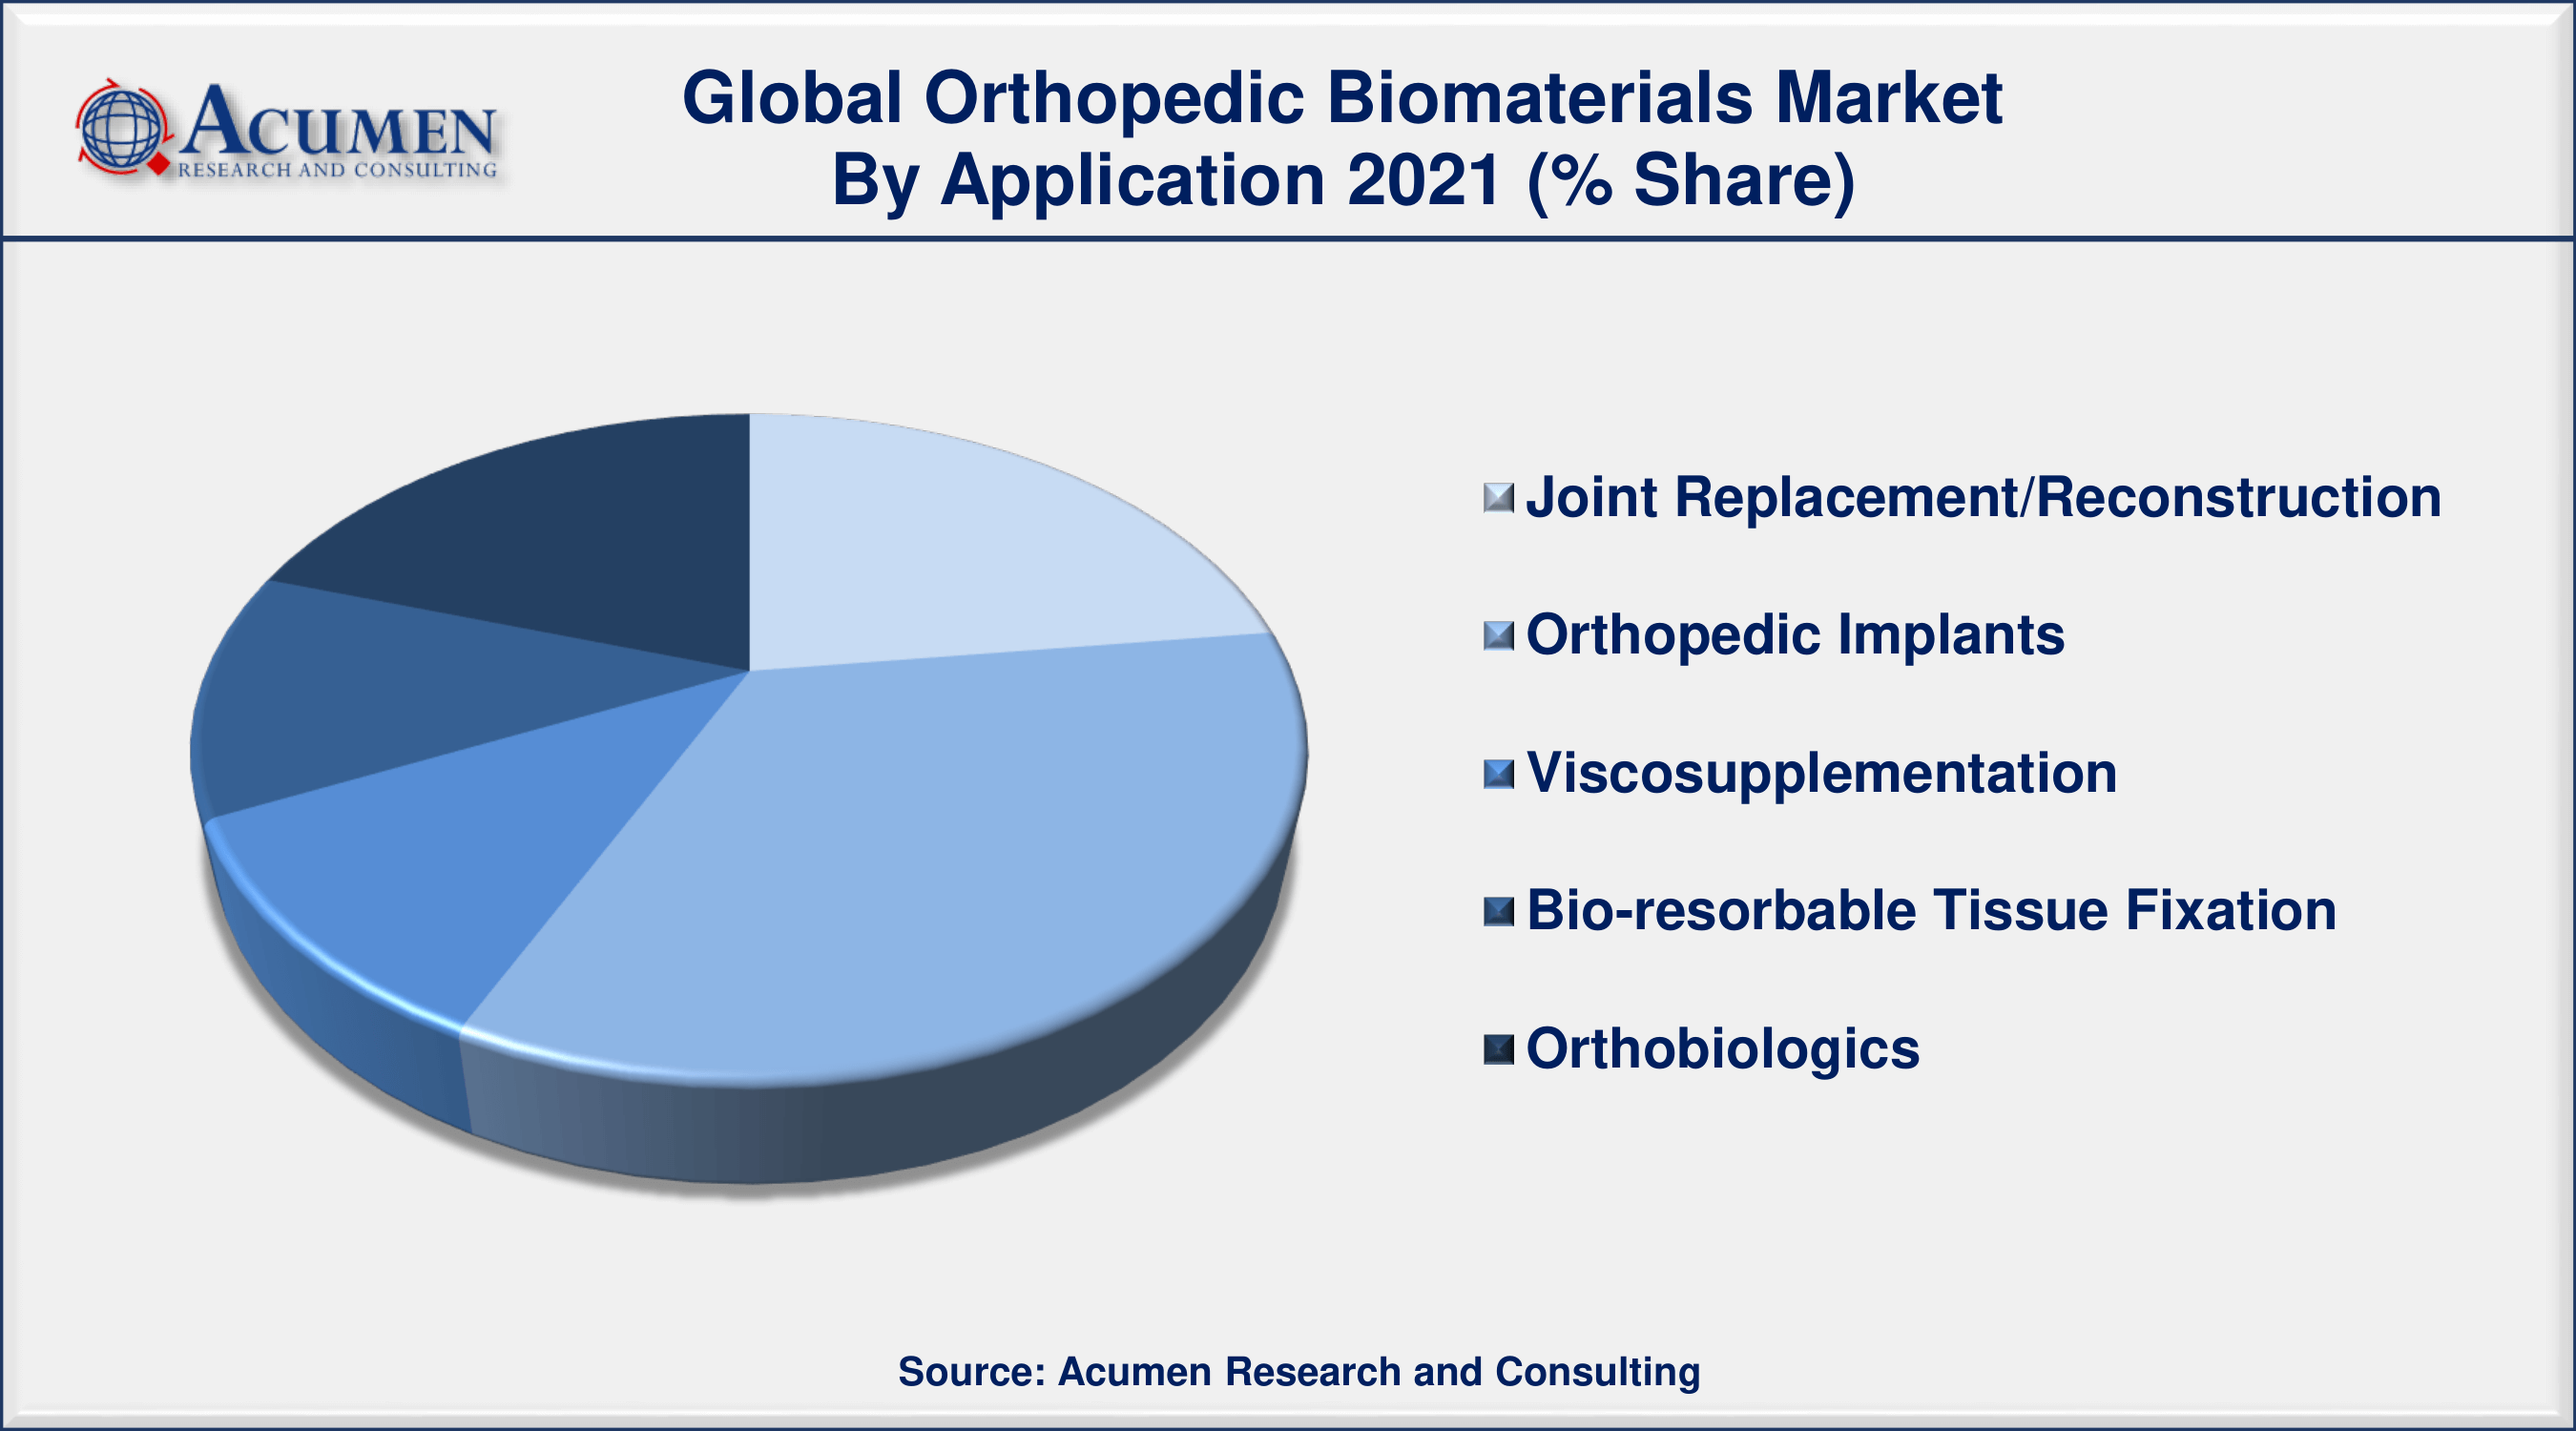 North America region accounting for around 36% of the global orthopedic biomaterials market share in 2021